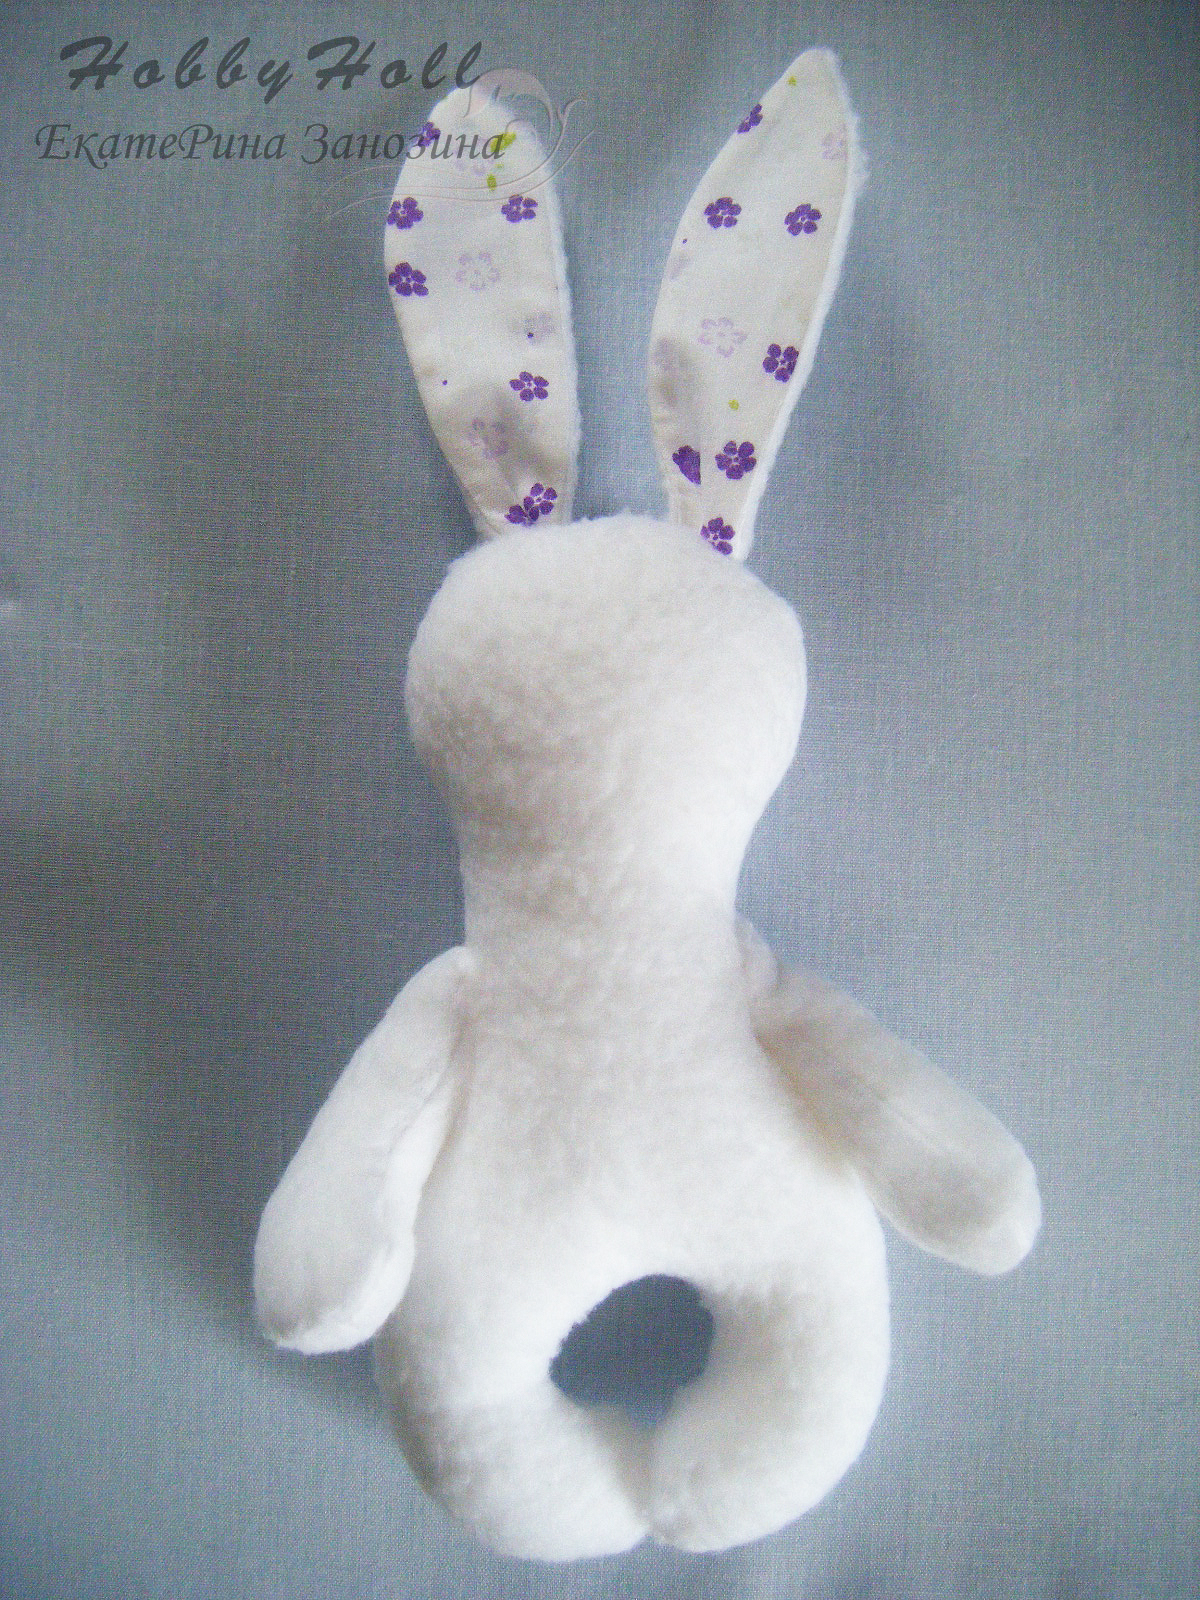 How-to-Make-an-Adorable-Felted-Bunny-8.jpg